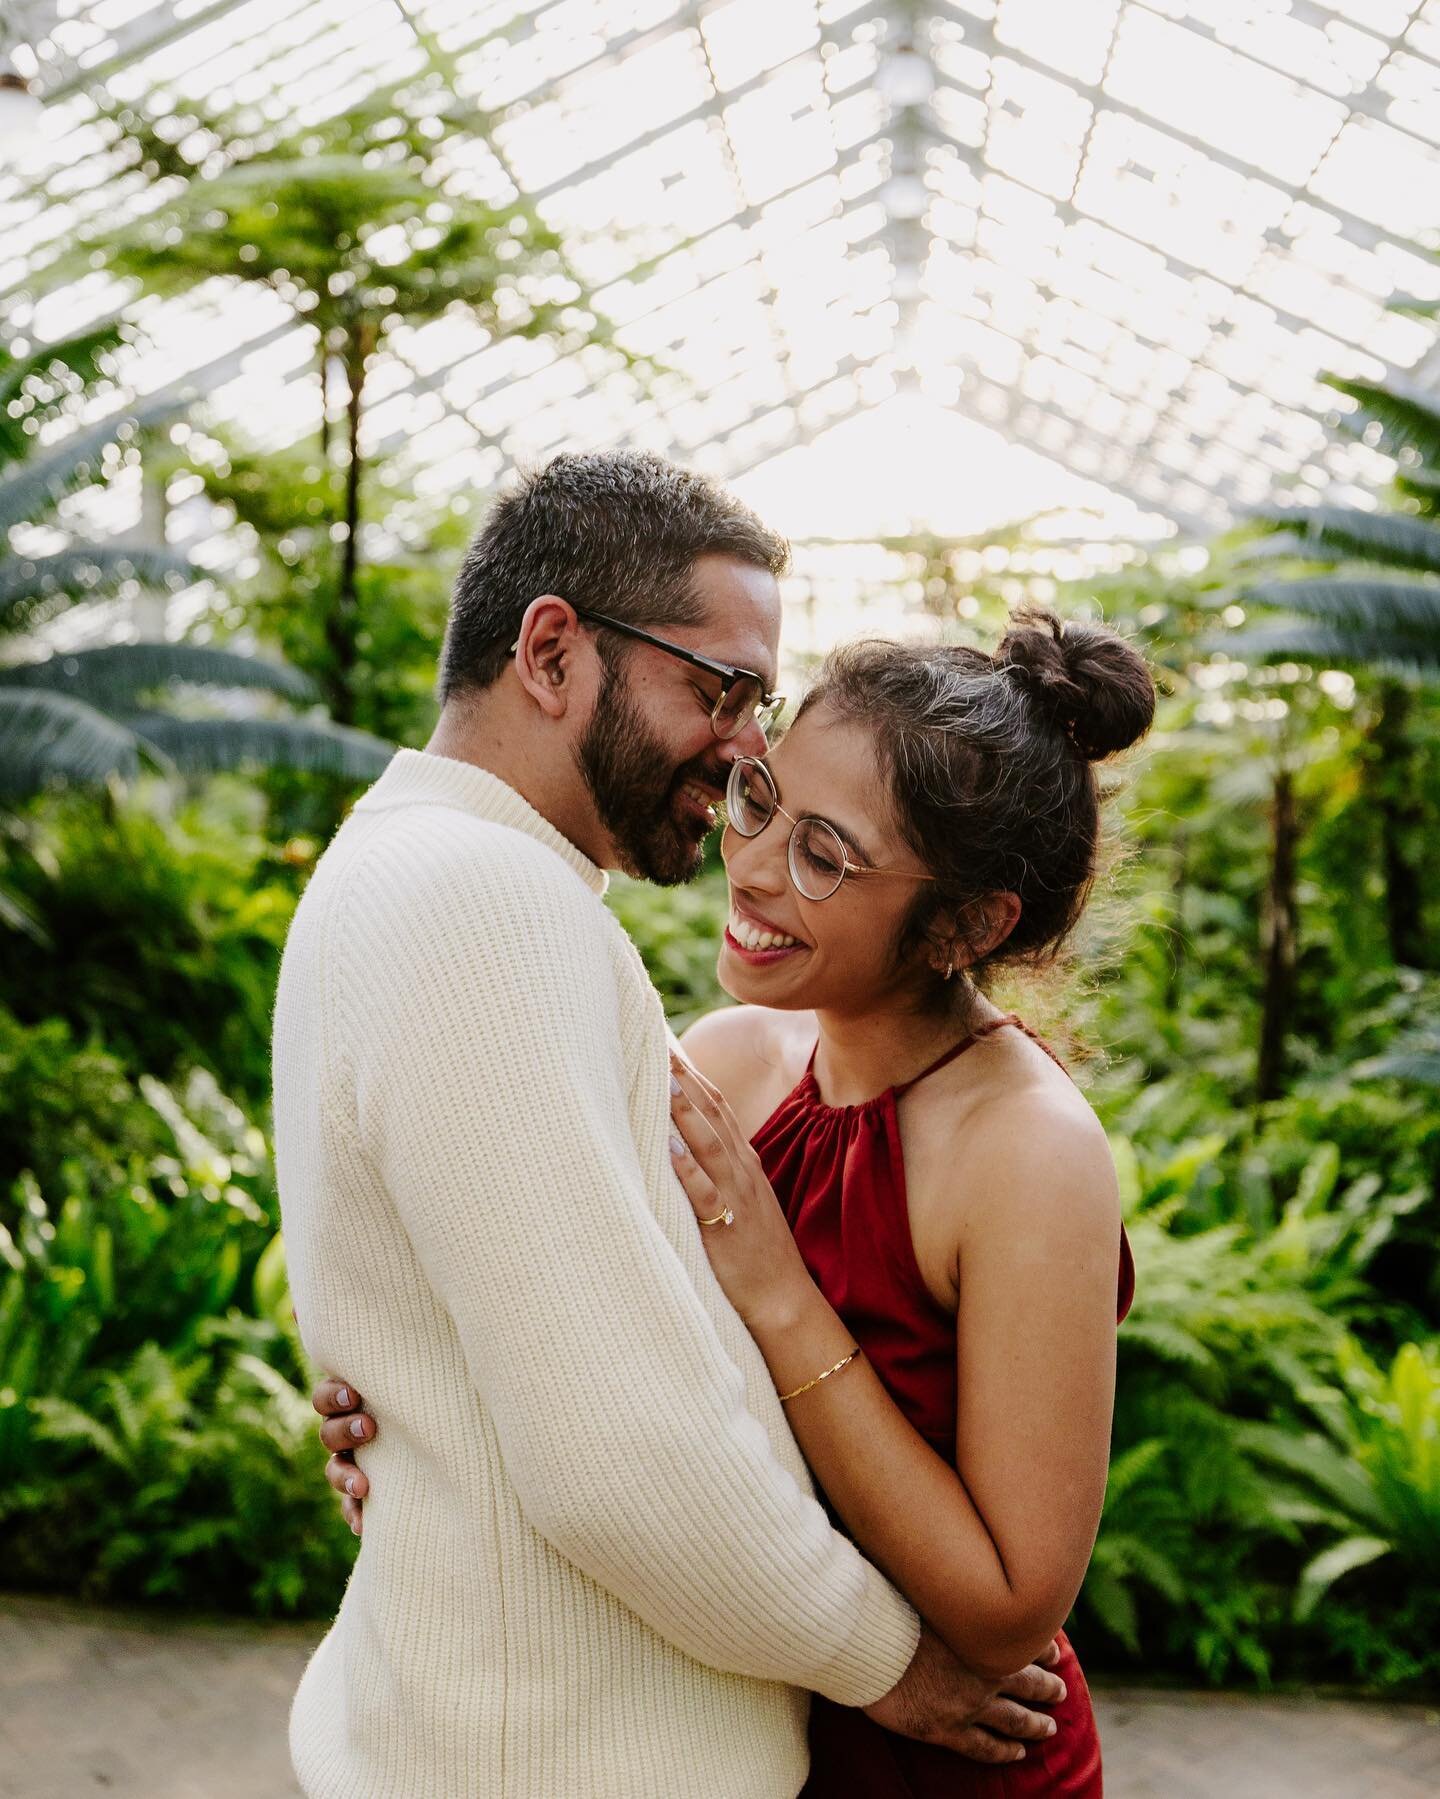 Somya said yes to Katan on the most beautiful Chicago Sunday of 2023 yet. 

These visiting lovebirds came back to the city they took their first trip as a couple, and Katan knew he wanted to propose at this beautiful spot that Somya loved their first